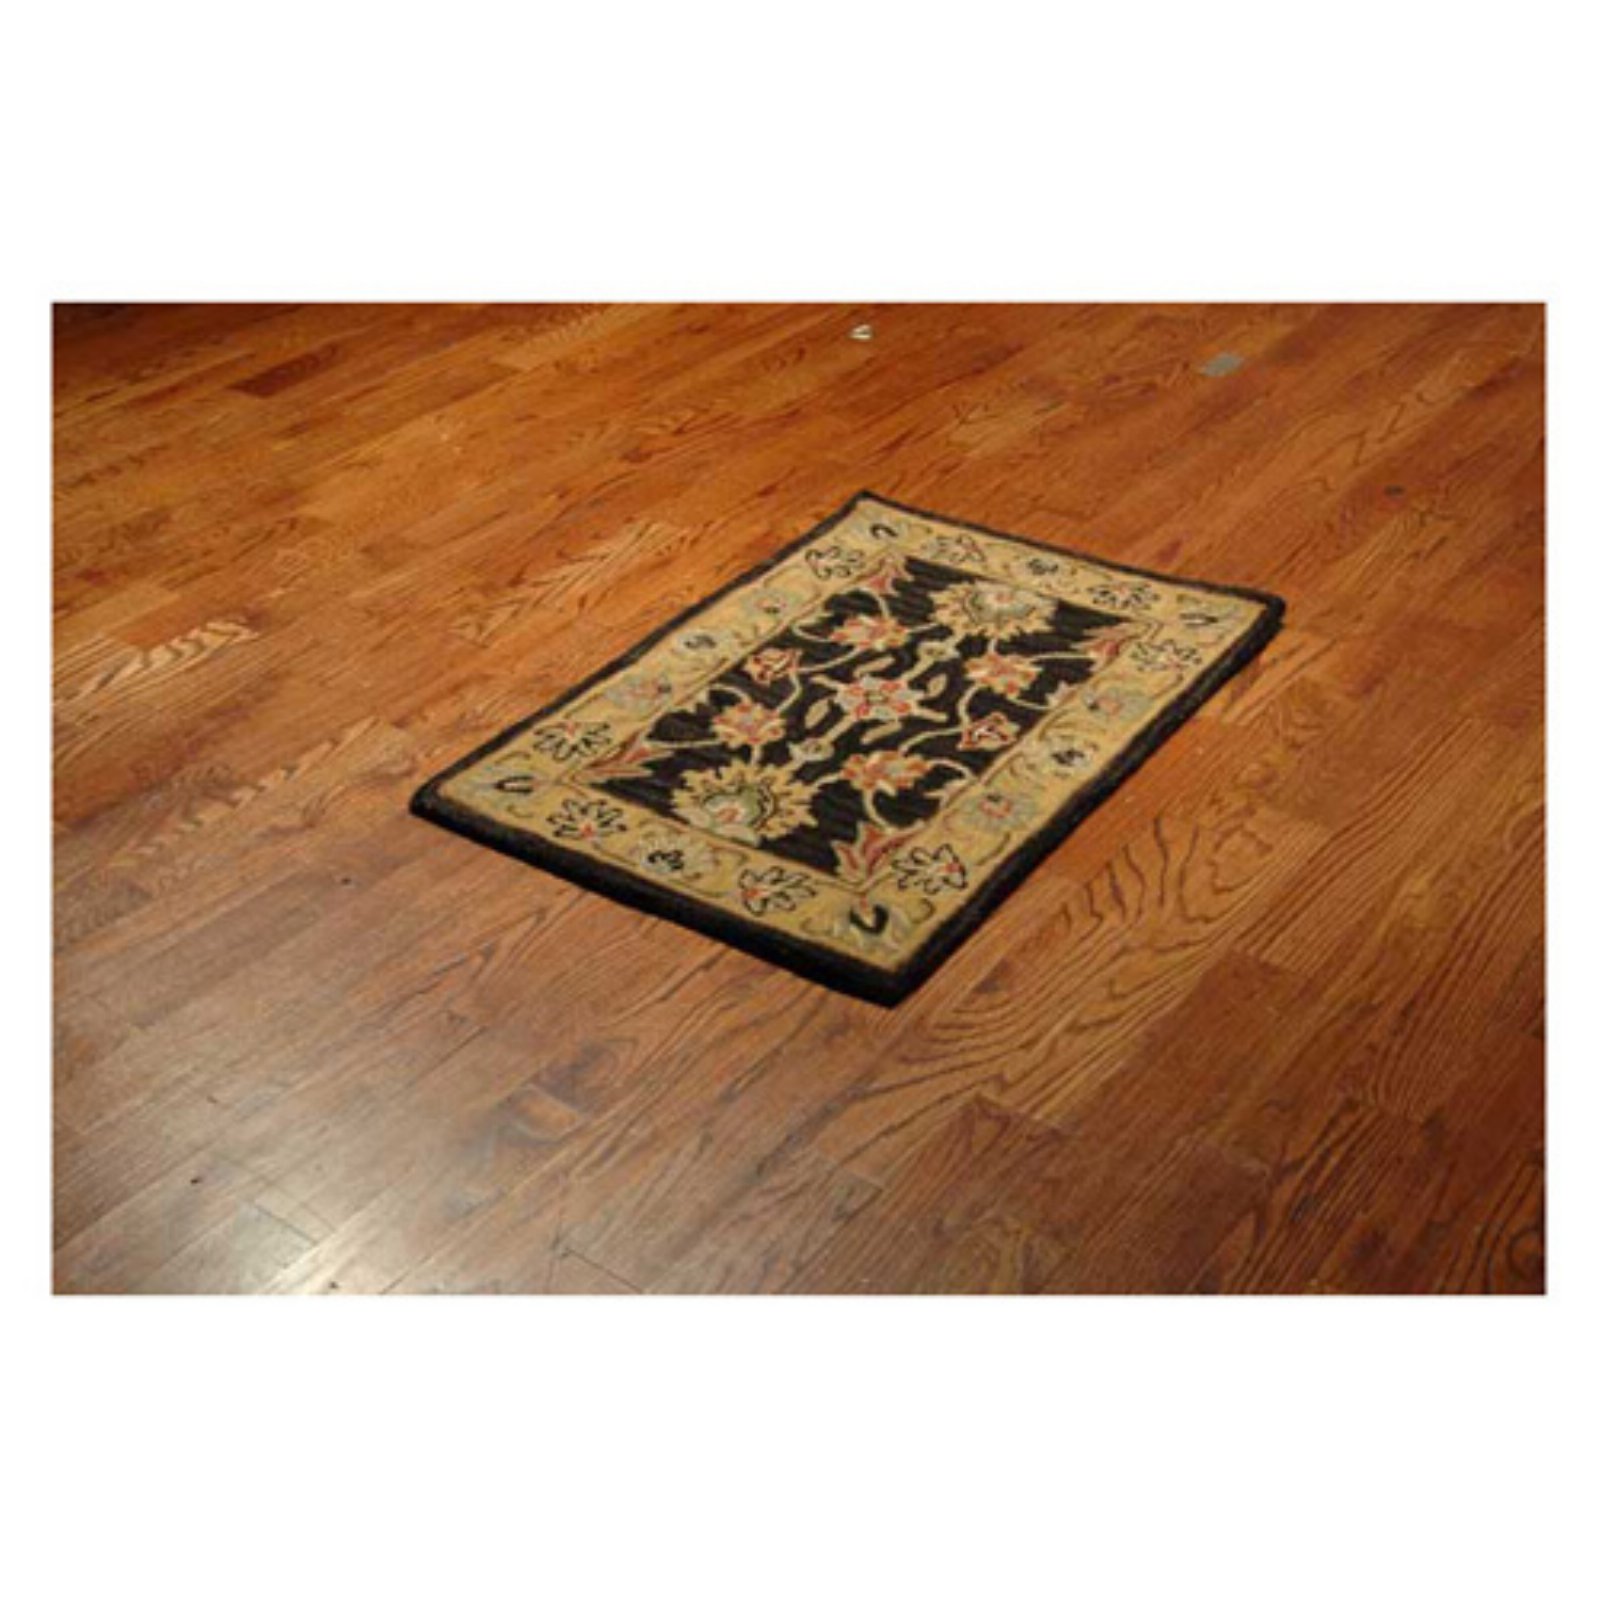 SAFAVIEH Heritage Regis Traditional Wool Area Rug, Charcoal/Gold, 7'6" x 9'6" Oval - image 3 of 10